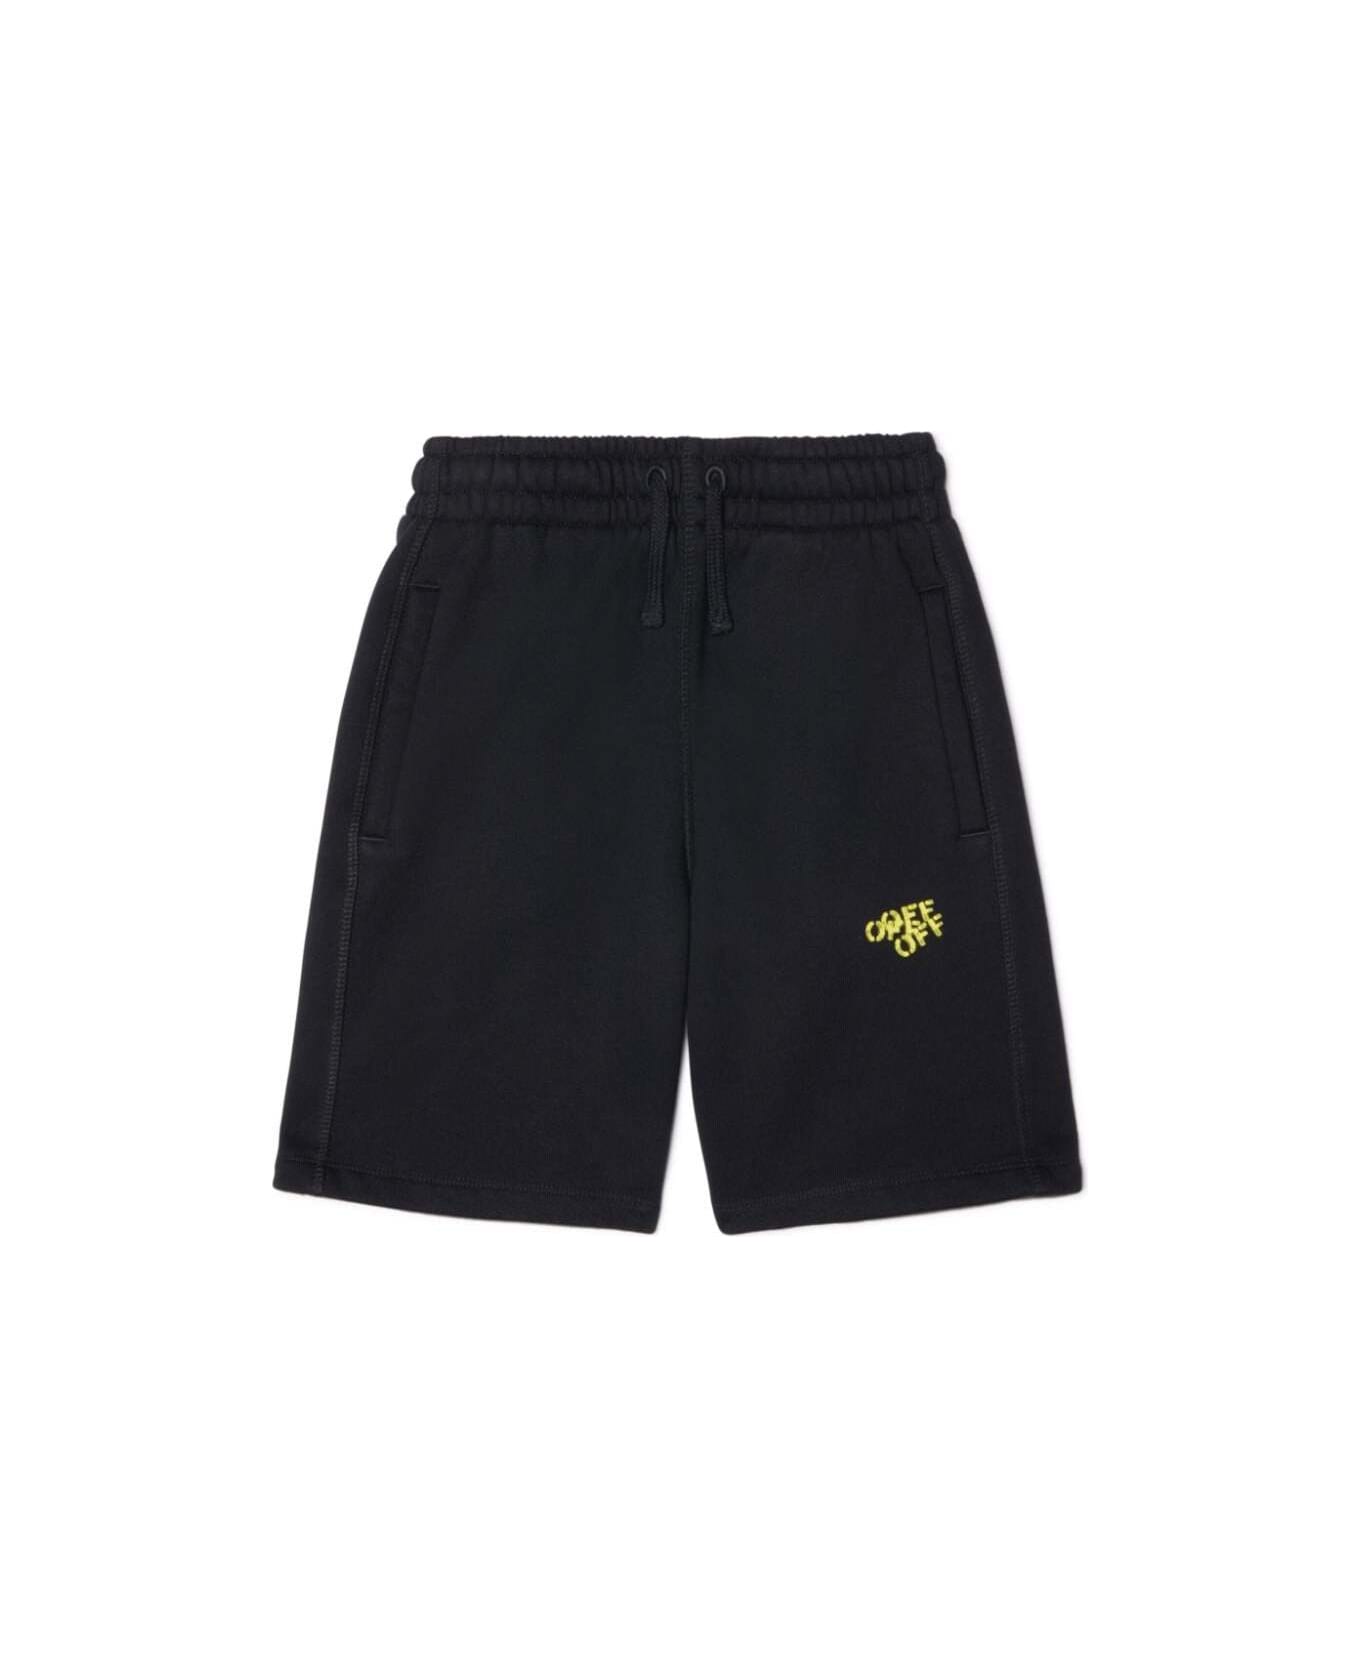 Off-White Black Shorts With Drawstring In Cotton Boy - Black